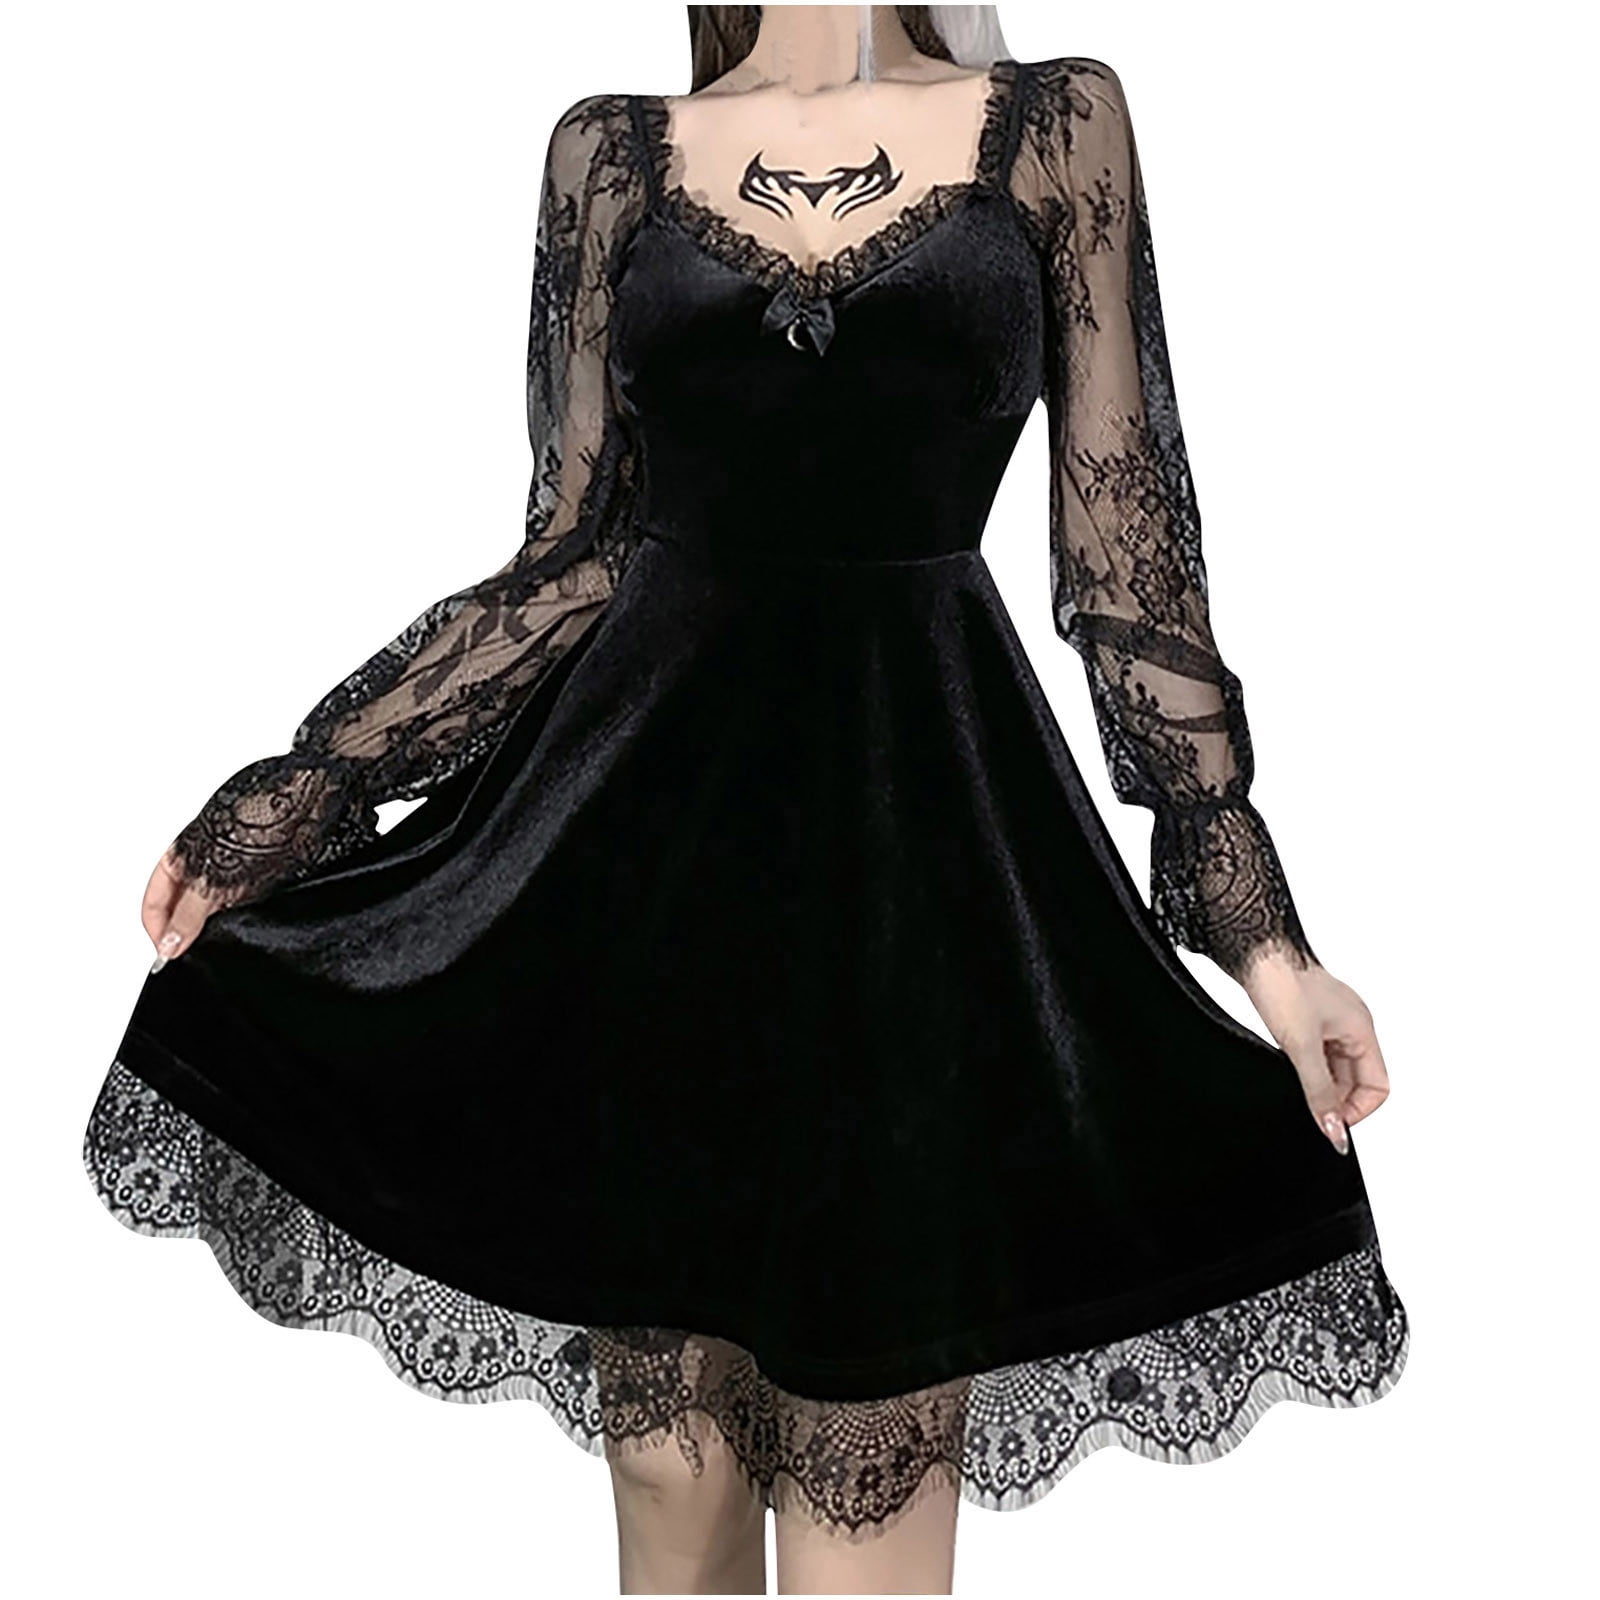 Womens Dresses Plus Size Long Sleeve Lace Patchwork Hollow Out Asymmetric Flowy Layered Elegant Dress for Ladies 